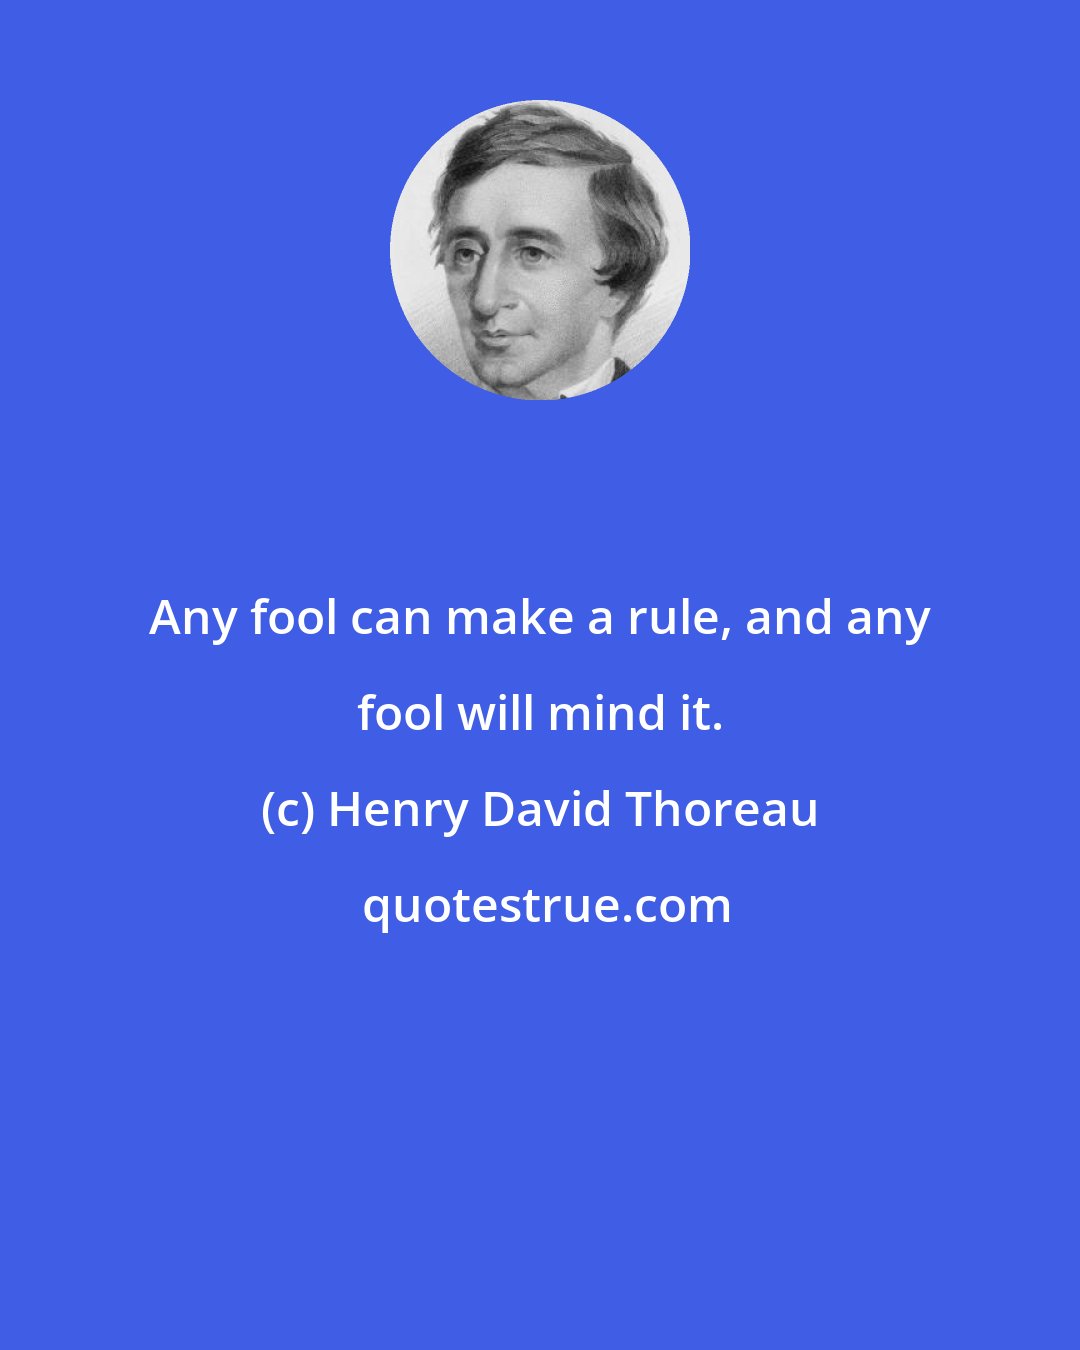 Henry David Thoreau: Any fool can make a rule, and any fool will mind it.